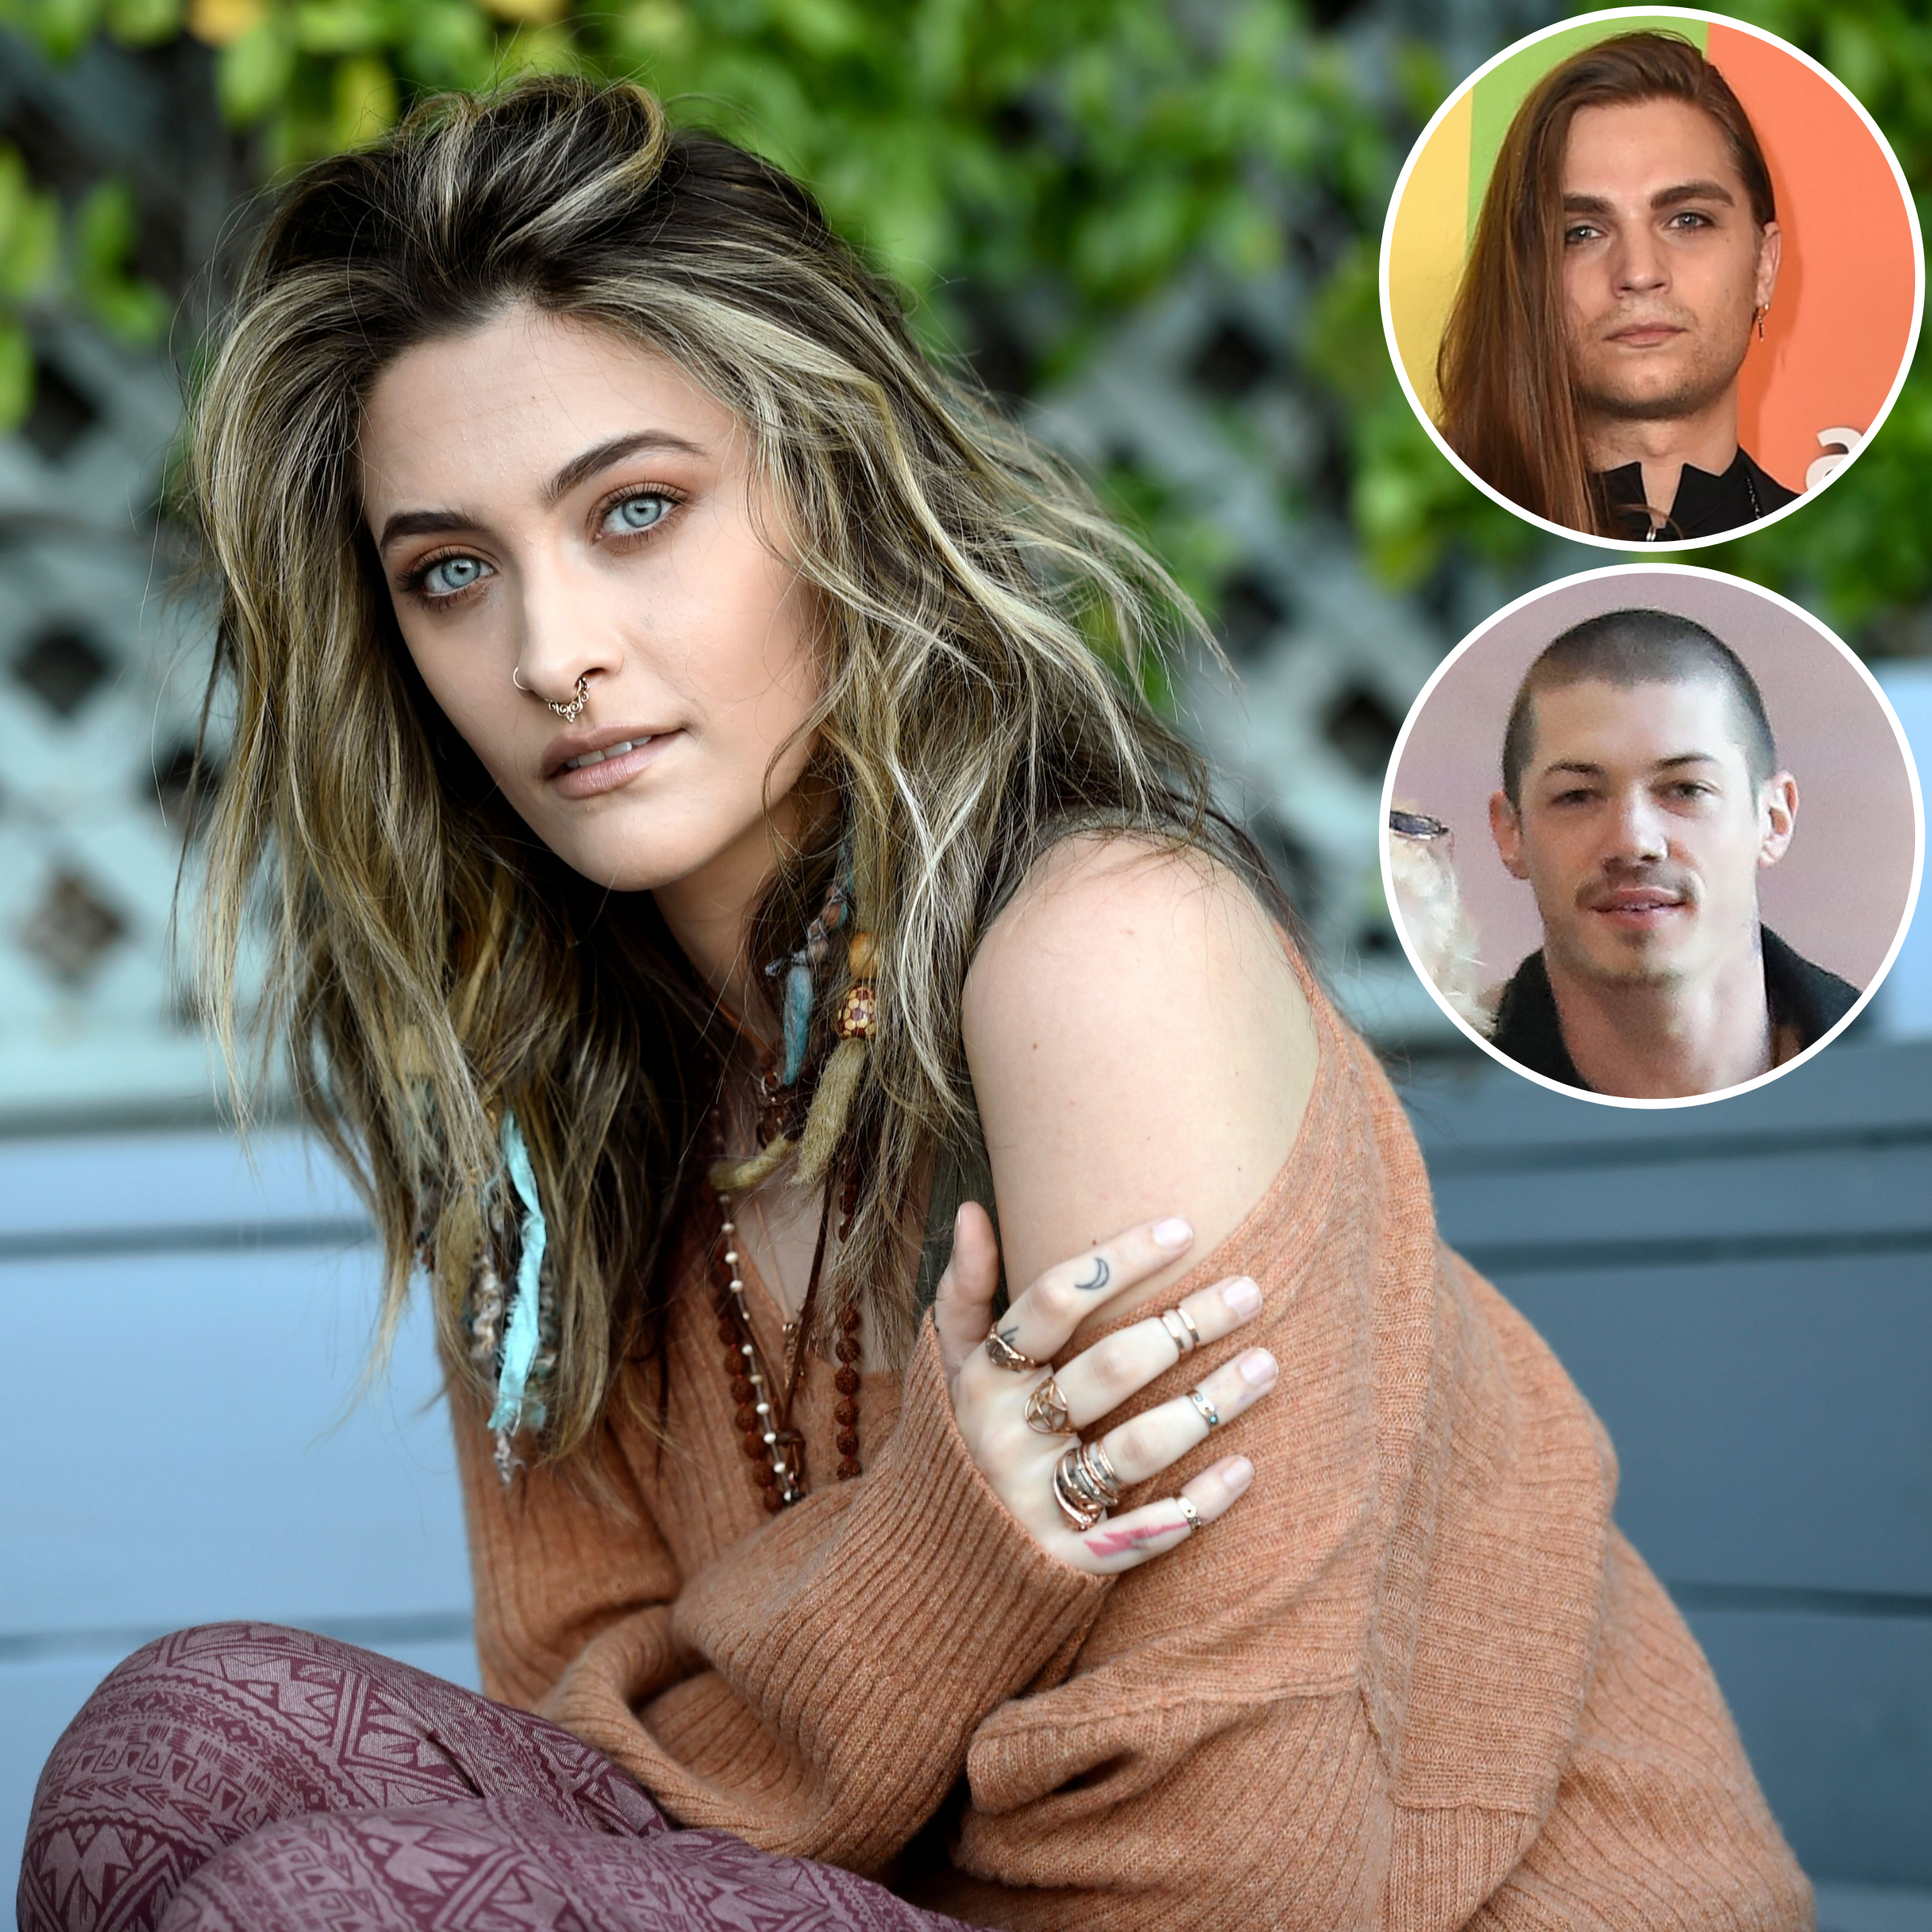 Paris Jackson Dating History See Her Ex-Boyfriends, Girlfriends image picture